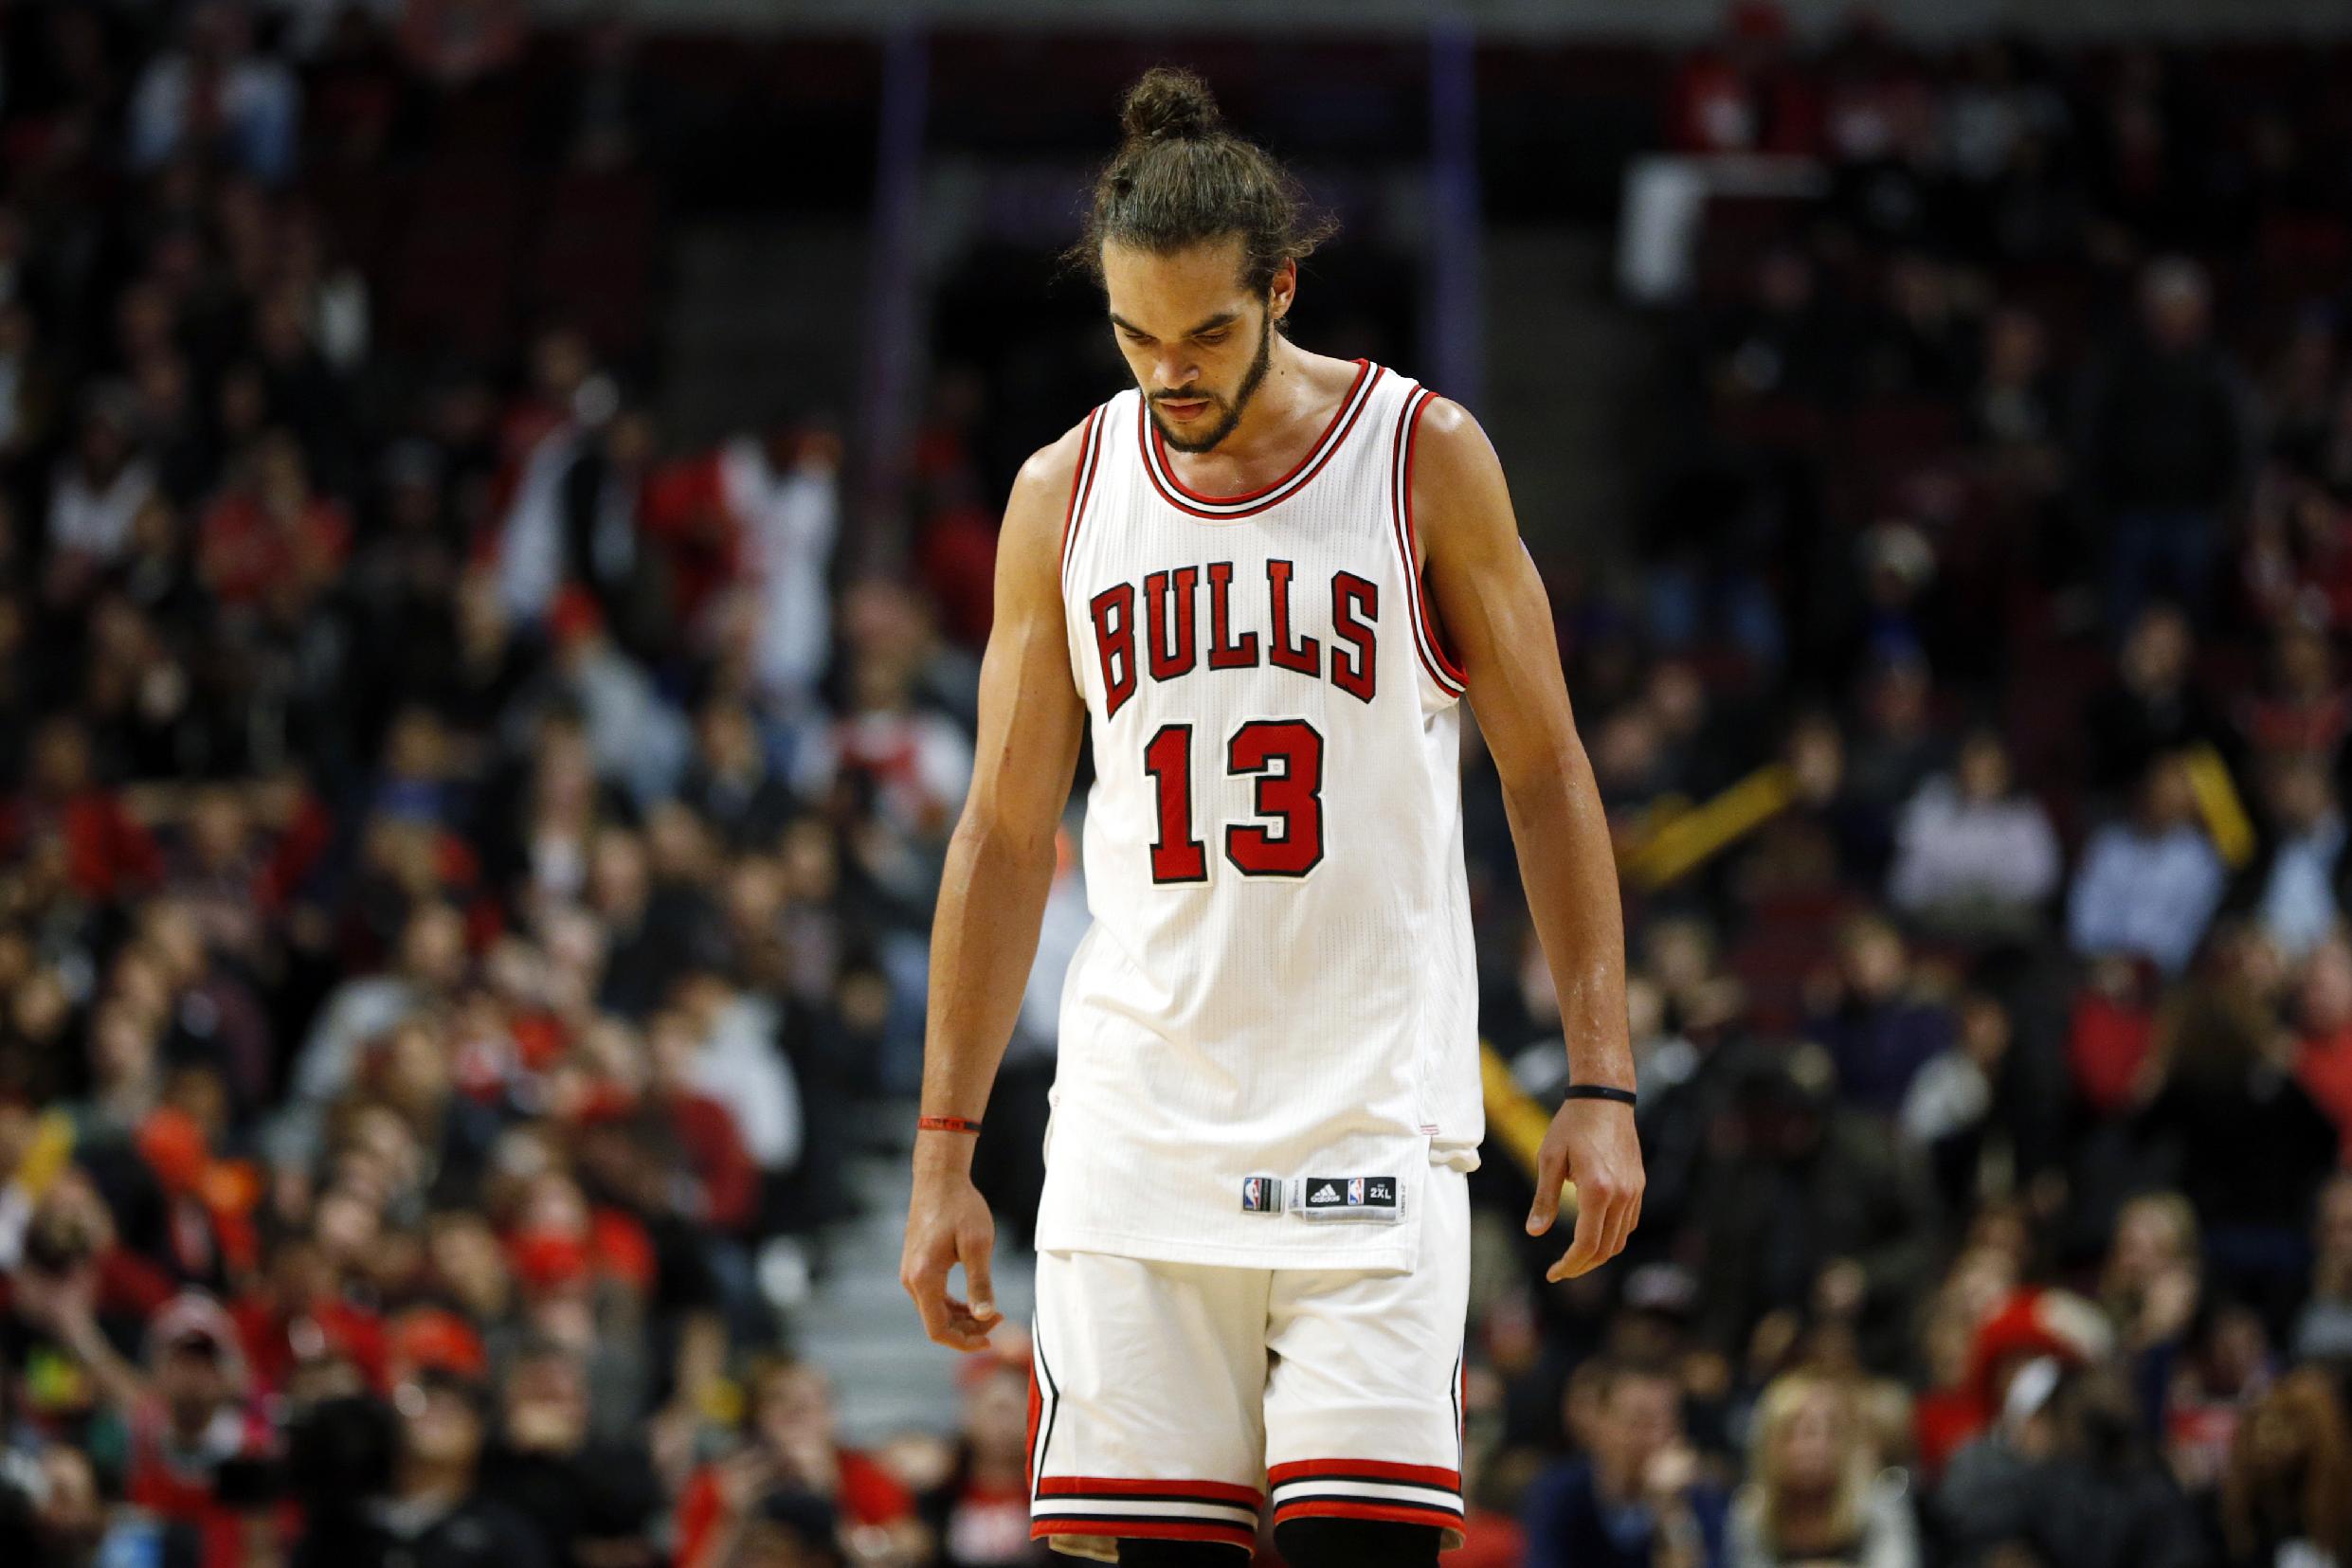 Joakim Noah may be preparing to say goodbye to Chicago. (AP/Andrew A. Nelles)